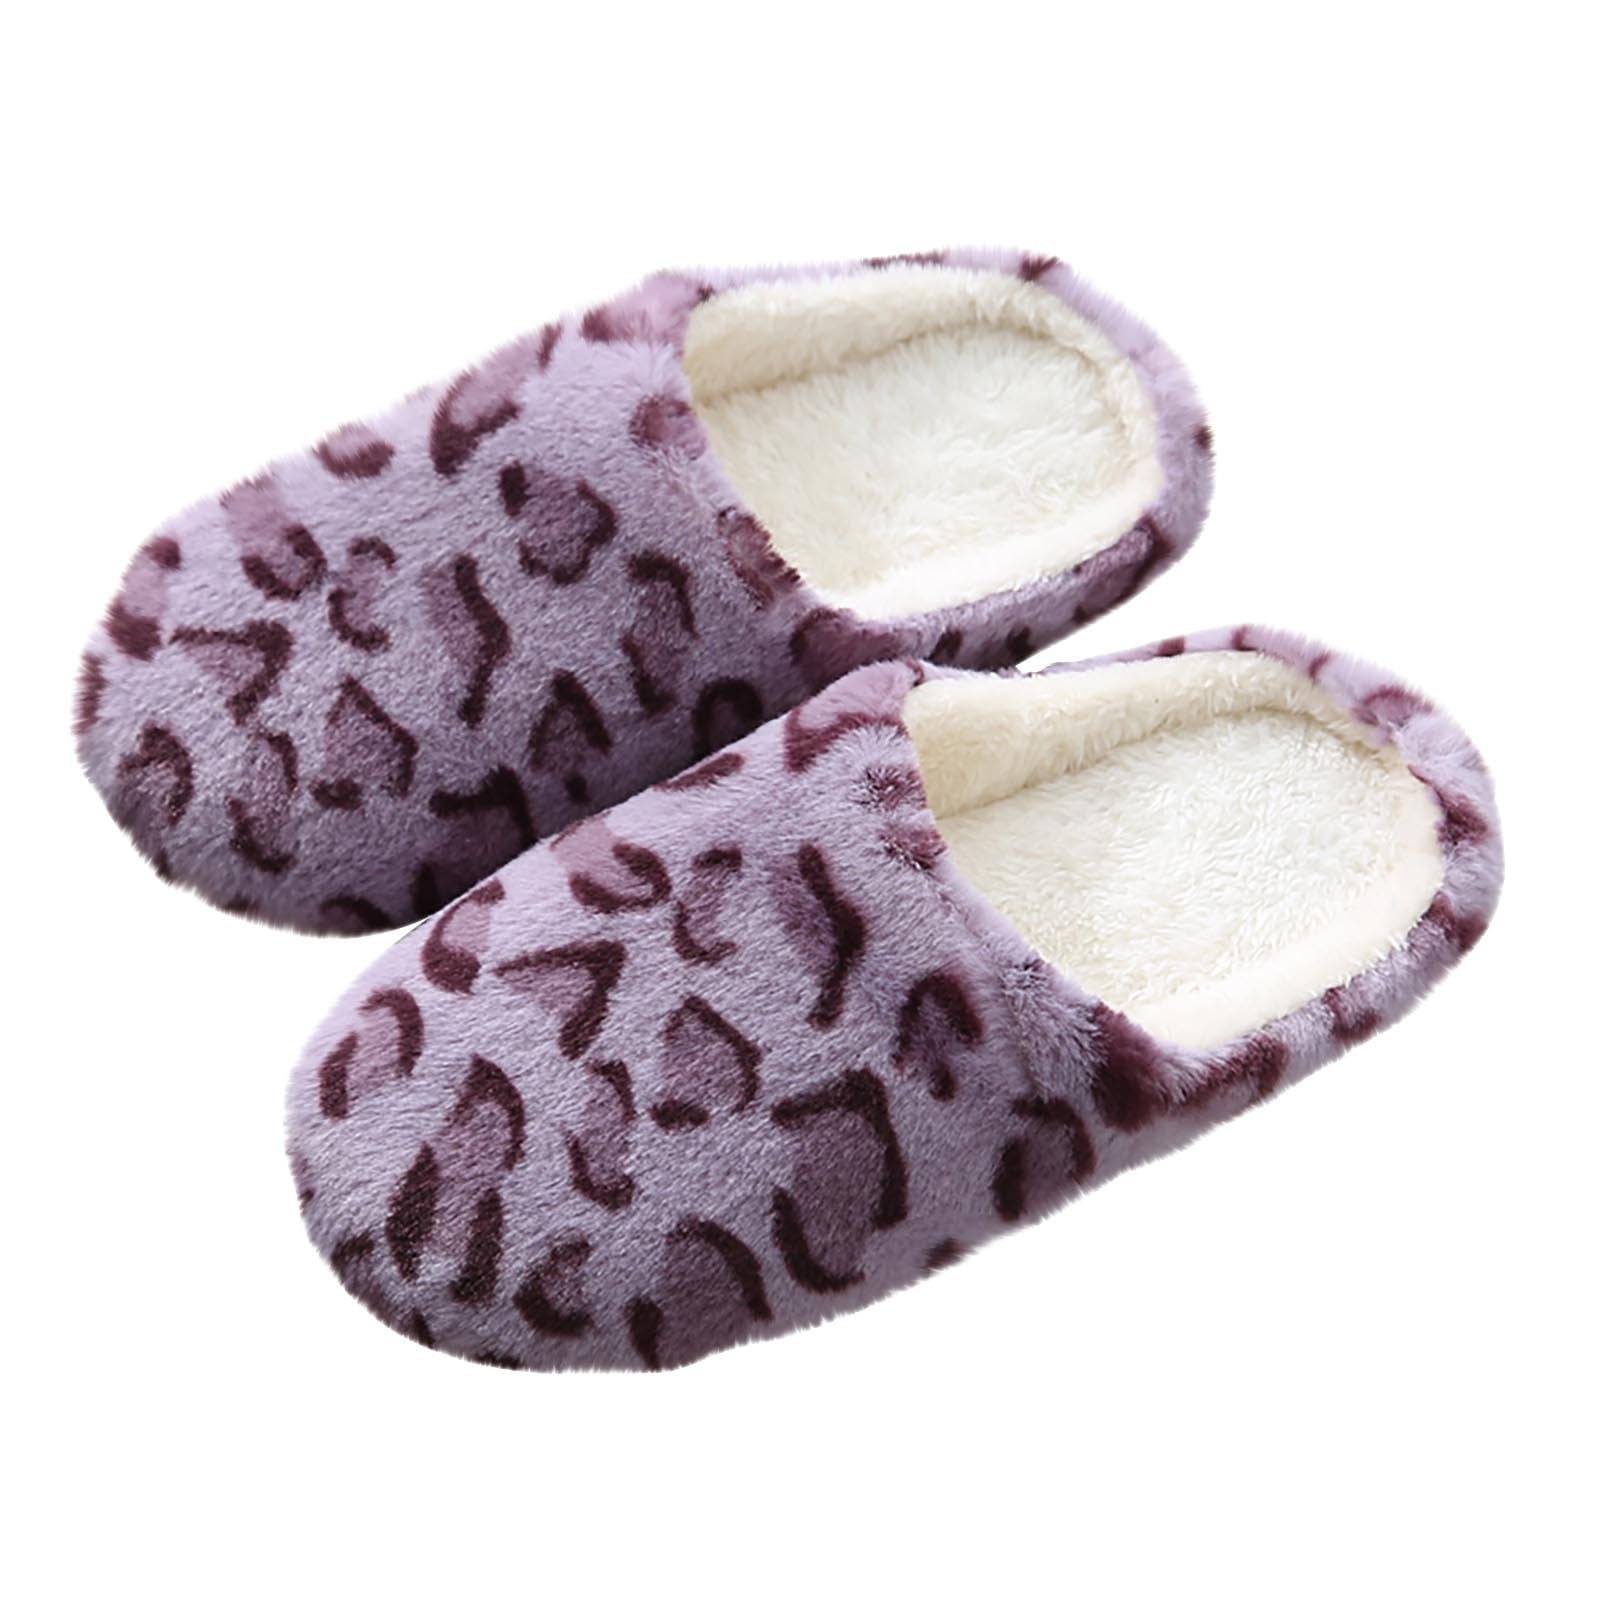 Chiccall Winter Warm Slippers, Comfy Leopard Print Faux Fur House Shoes ...